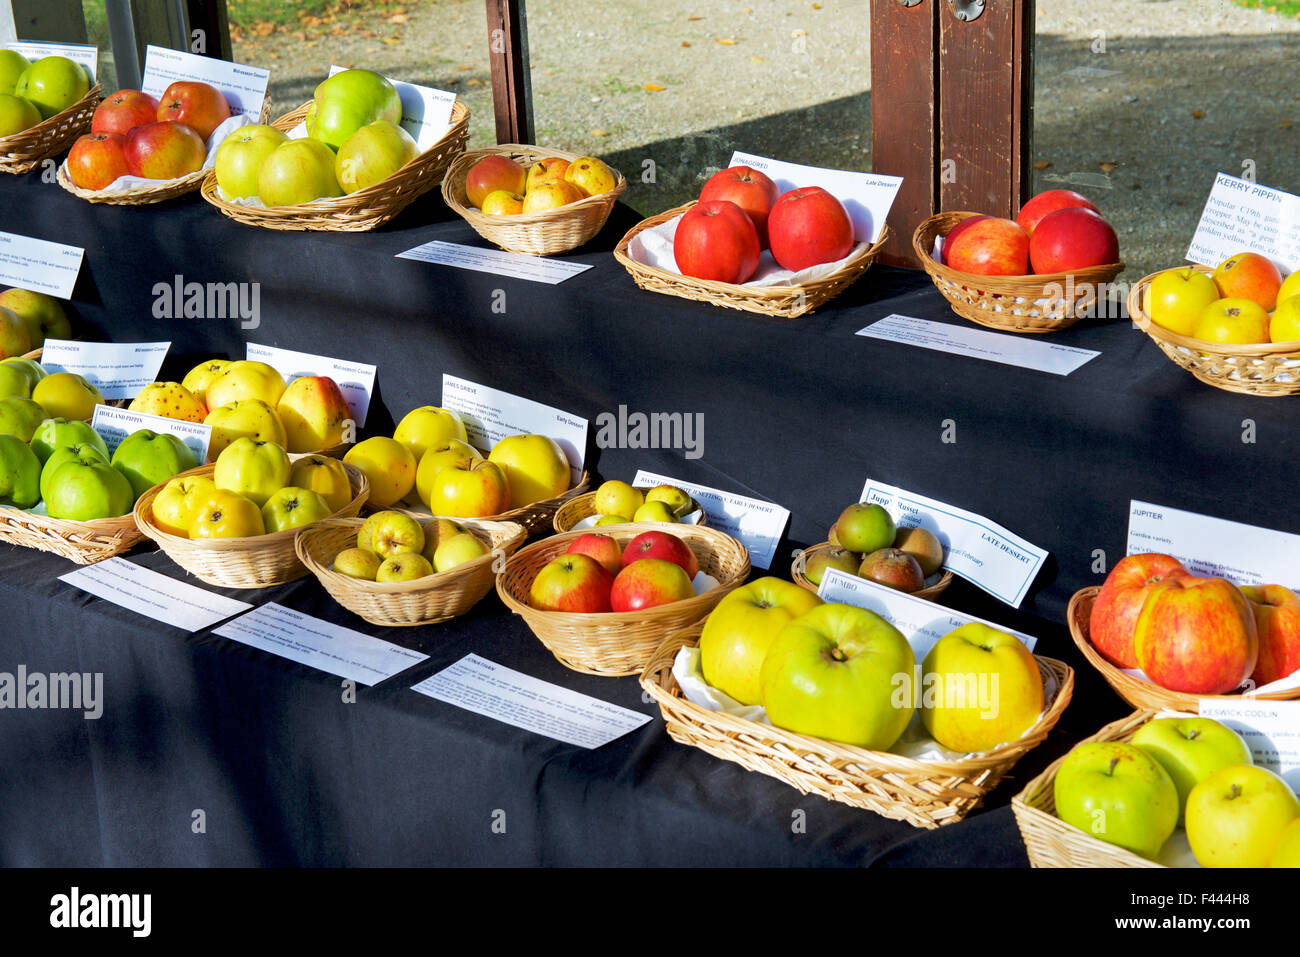 Display of apple varieties at Harlow Carr, the Royal Horticultural Society's gardens, nr Harrogate, North Yorkshire, England UK Stock Photo